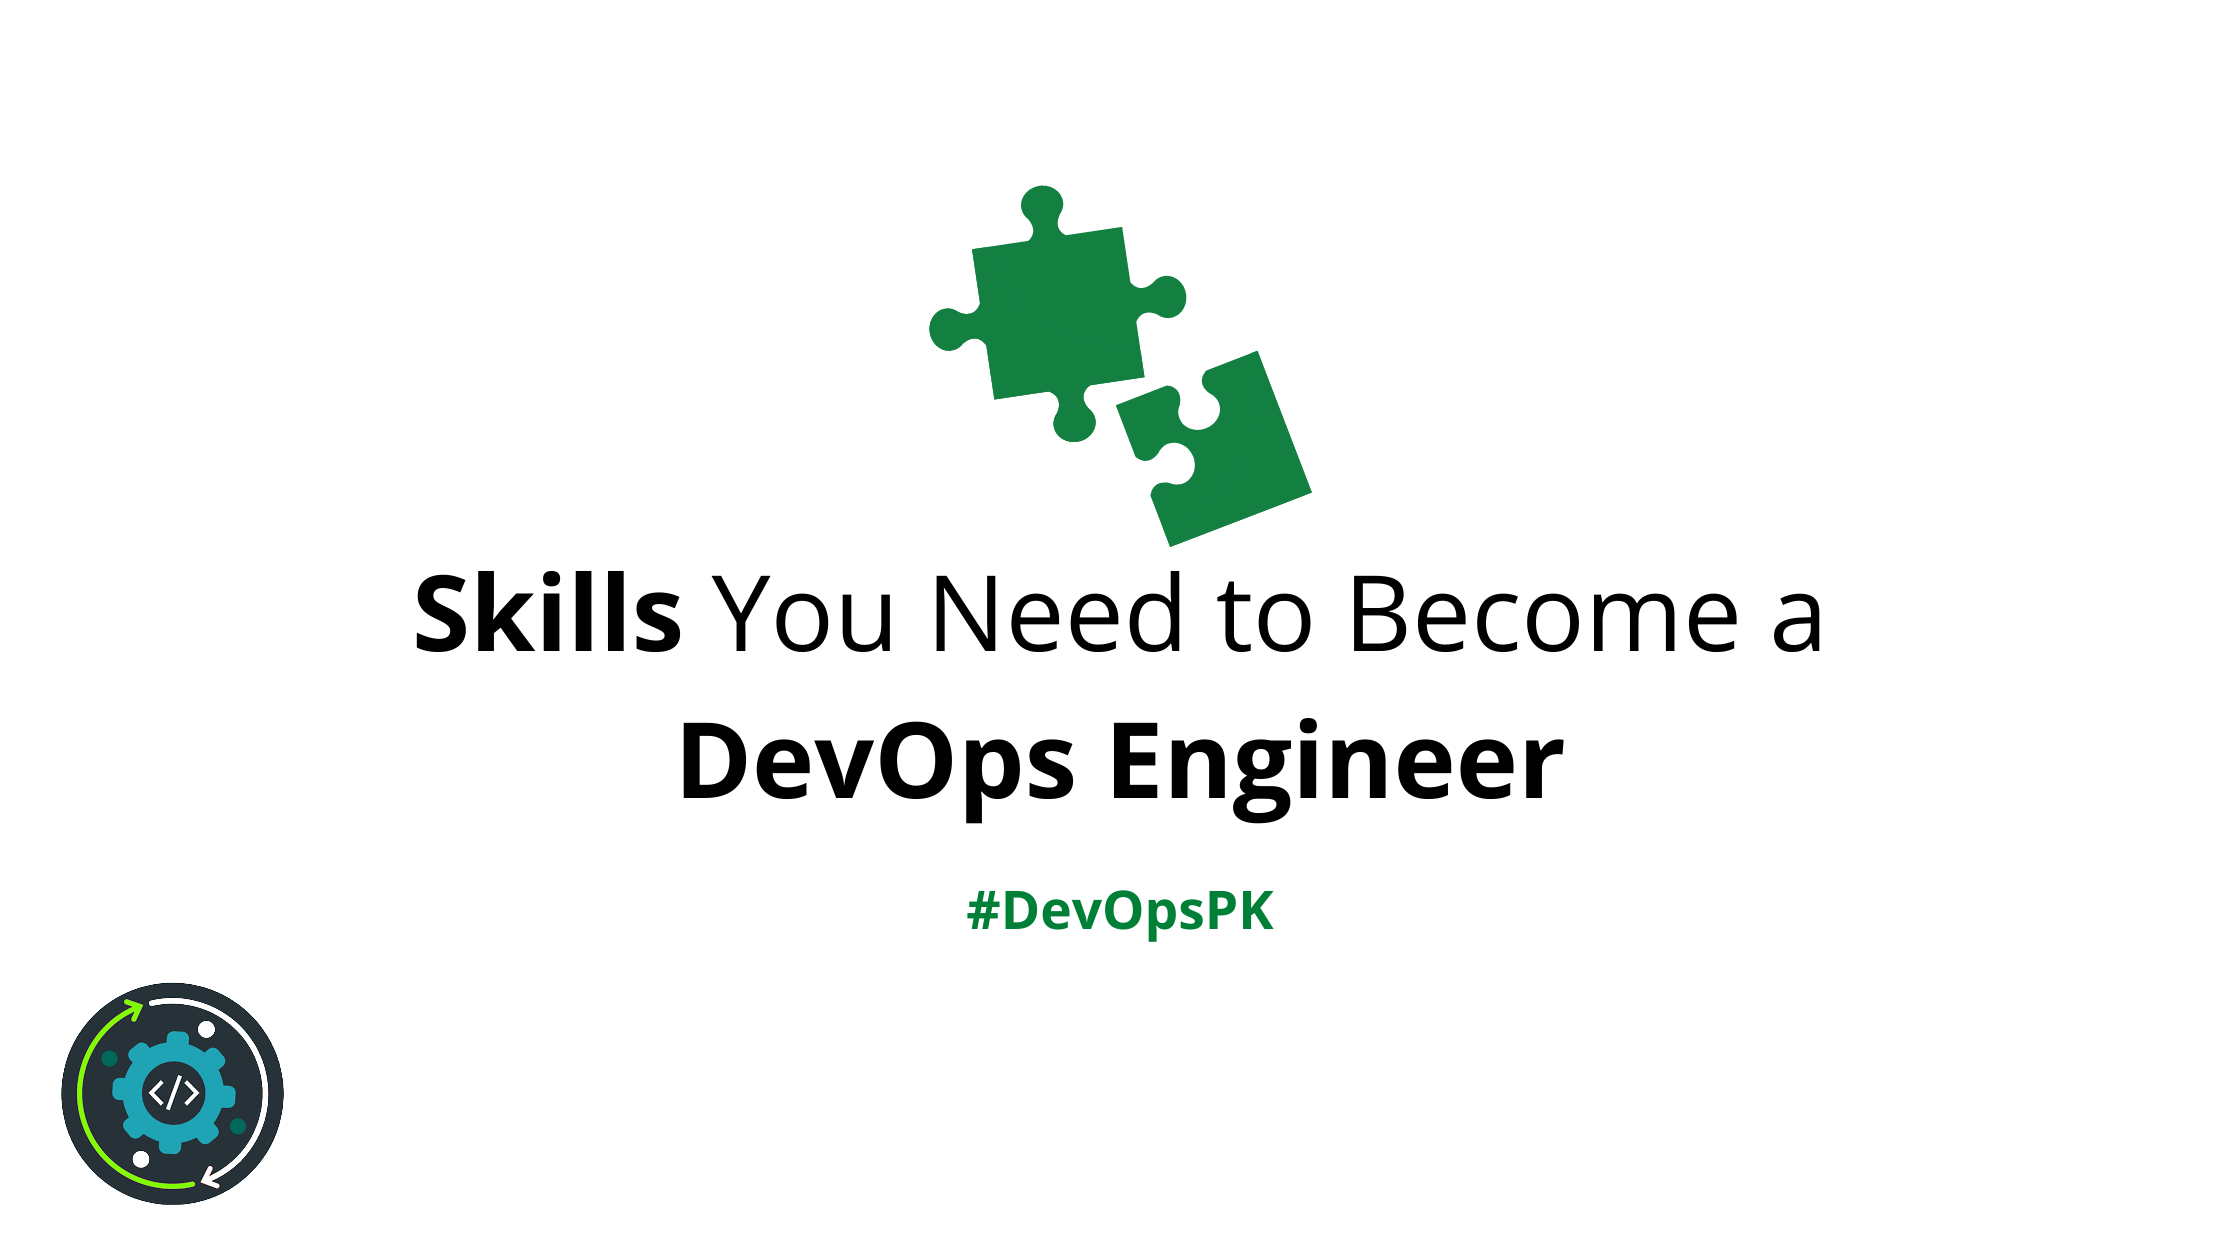 Skills You Need to become a DevOps Engineer